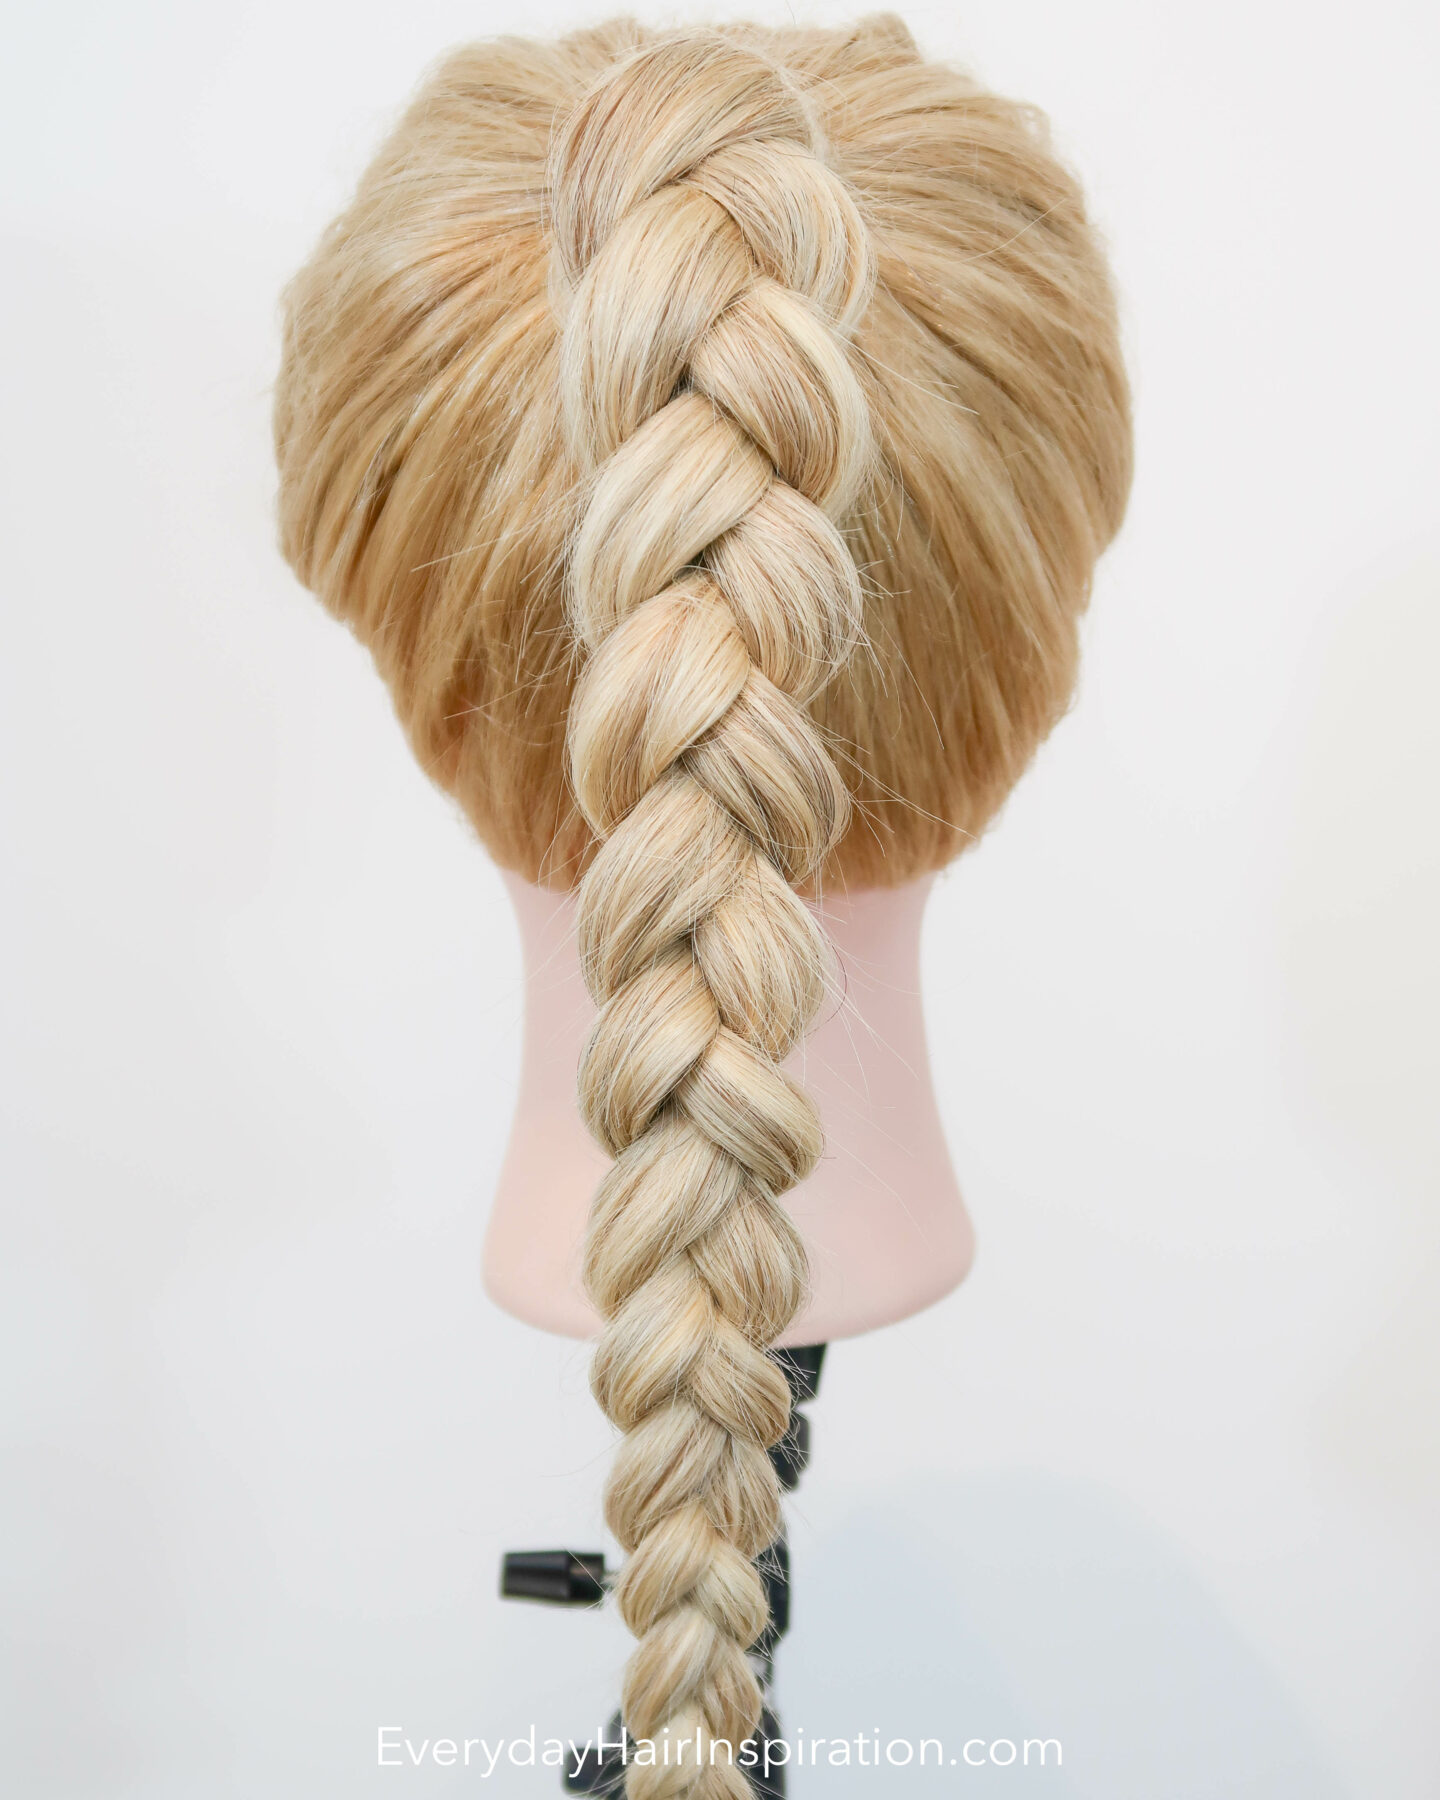 Blonde hairdresser doll seen from the back, with a high ponytail in the hair, with a 3 strand braid, made out of elastics and no braiding.